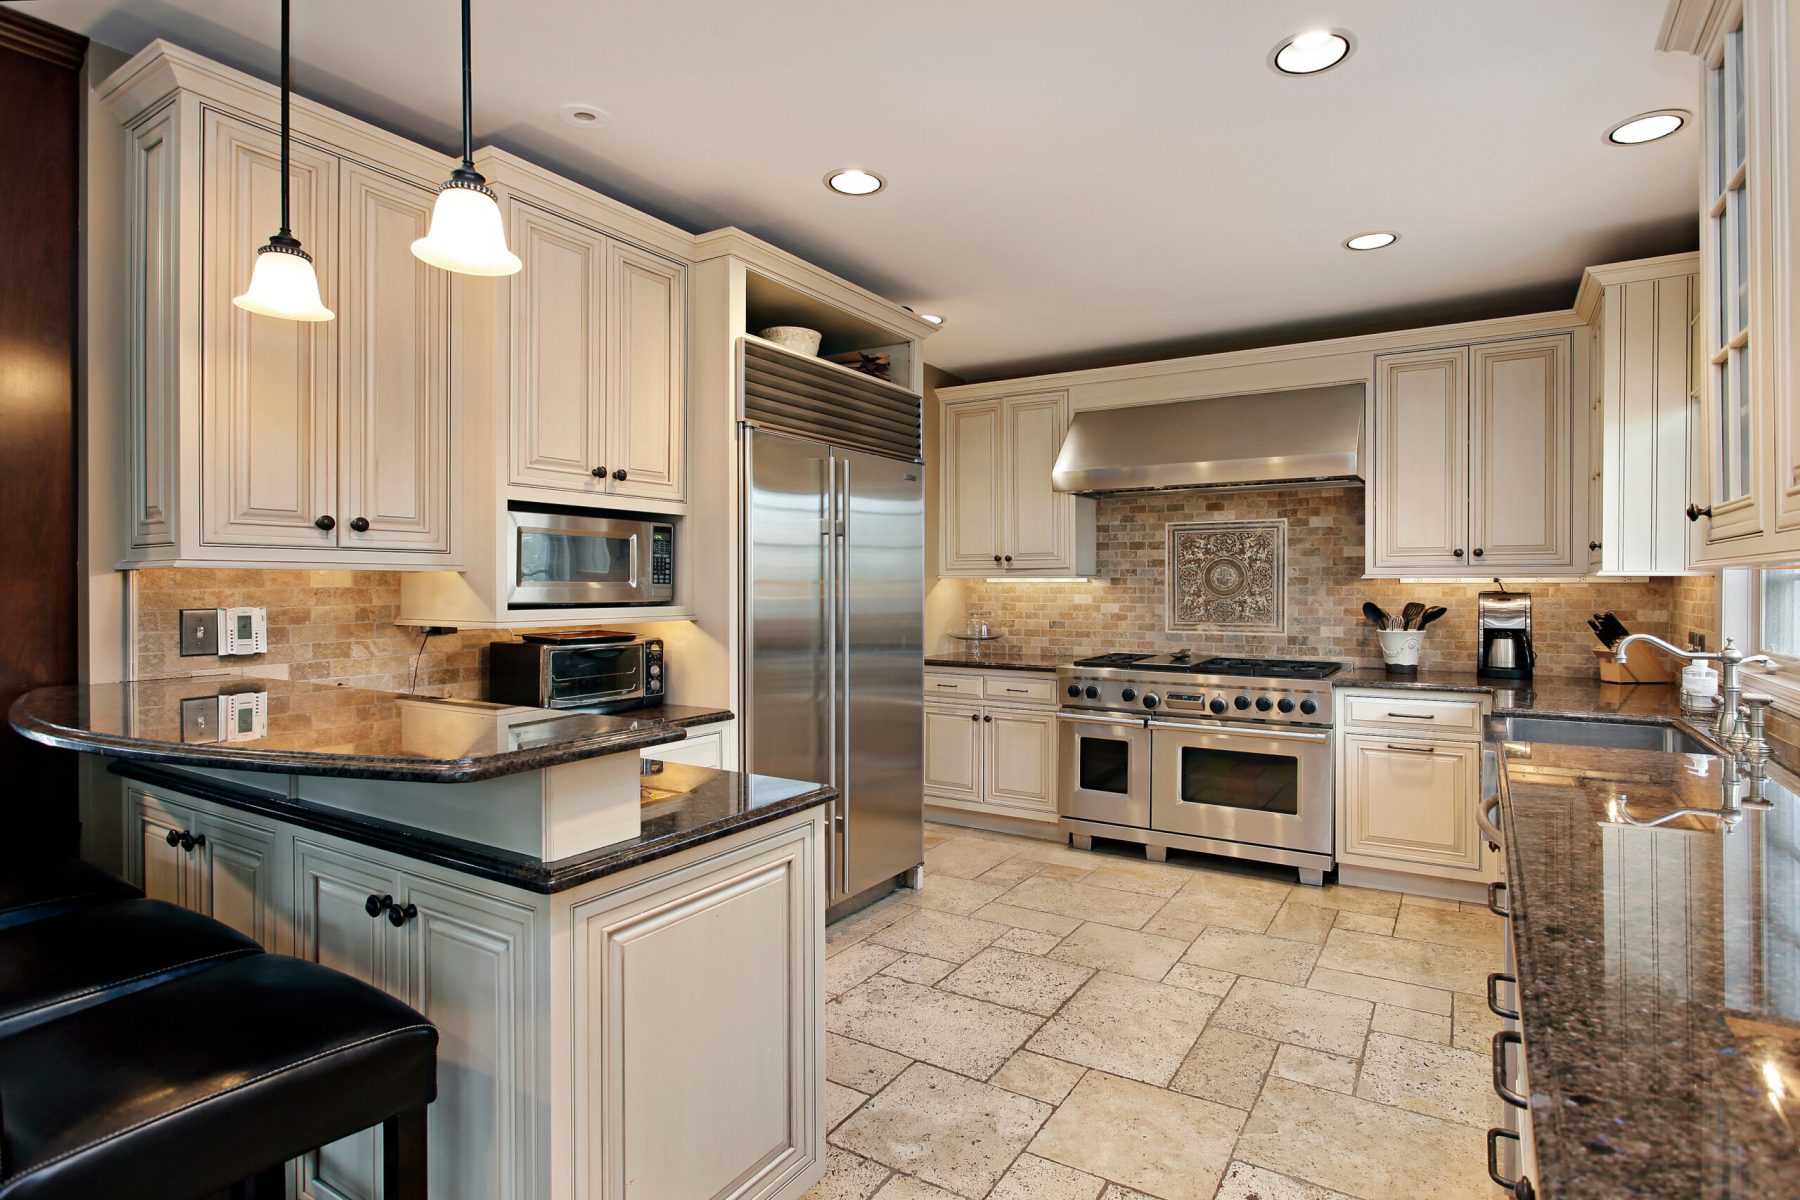 upscale luxury kitchen design with white cabinetry and black countertop